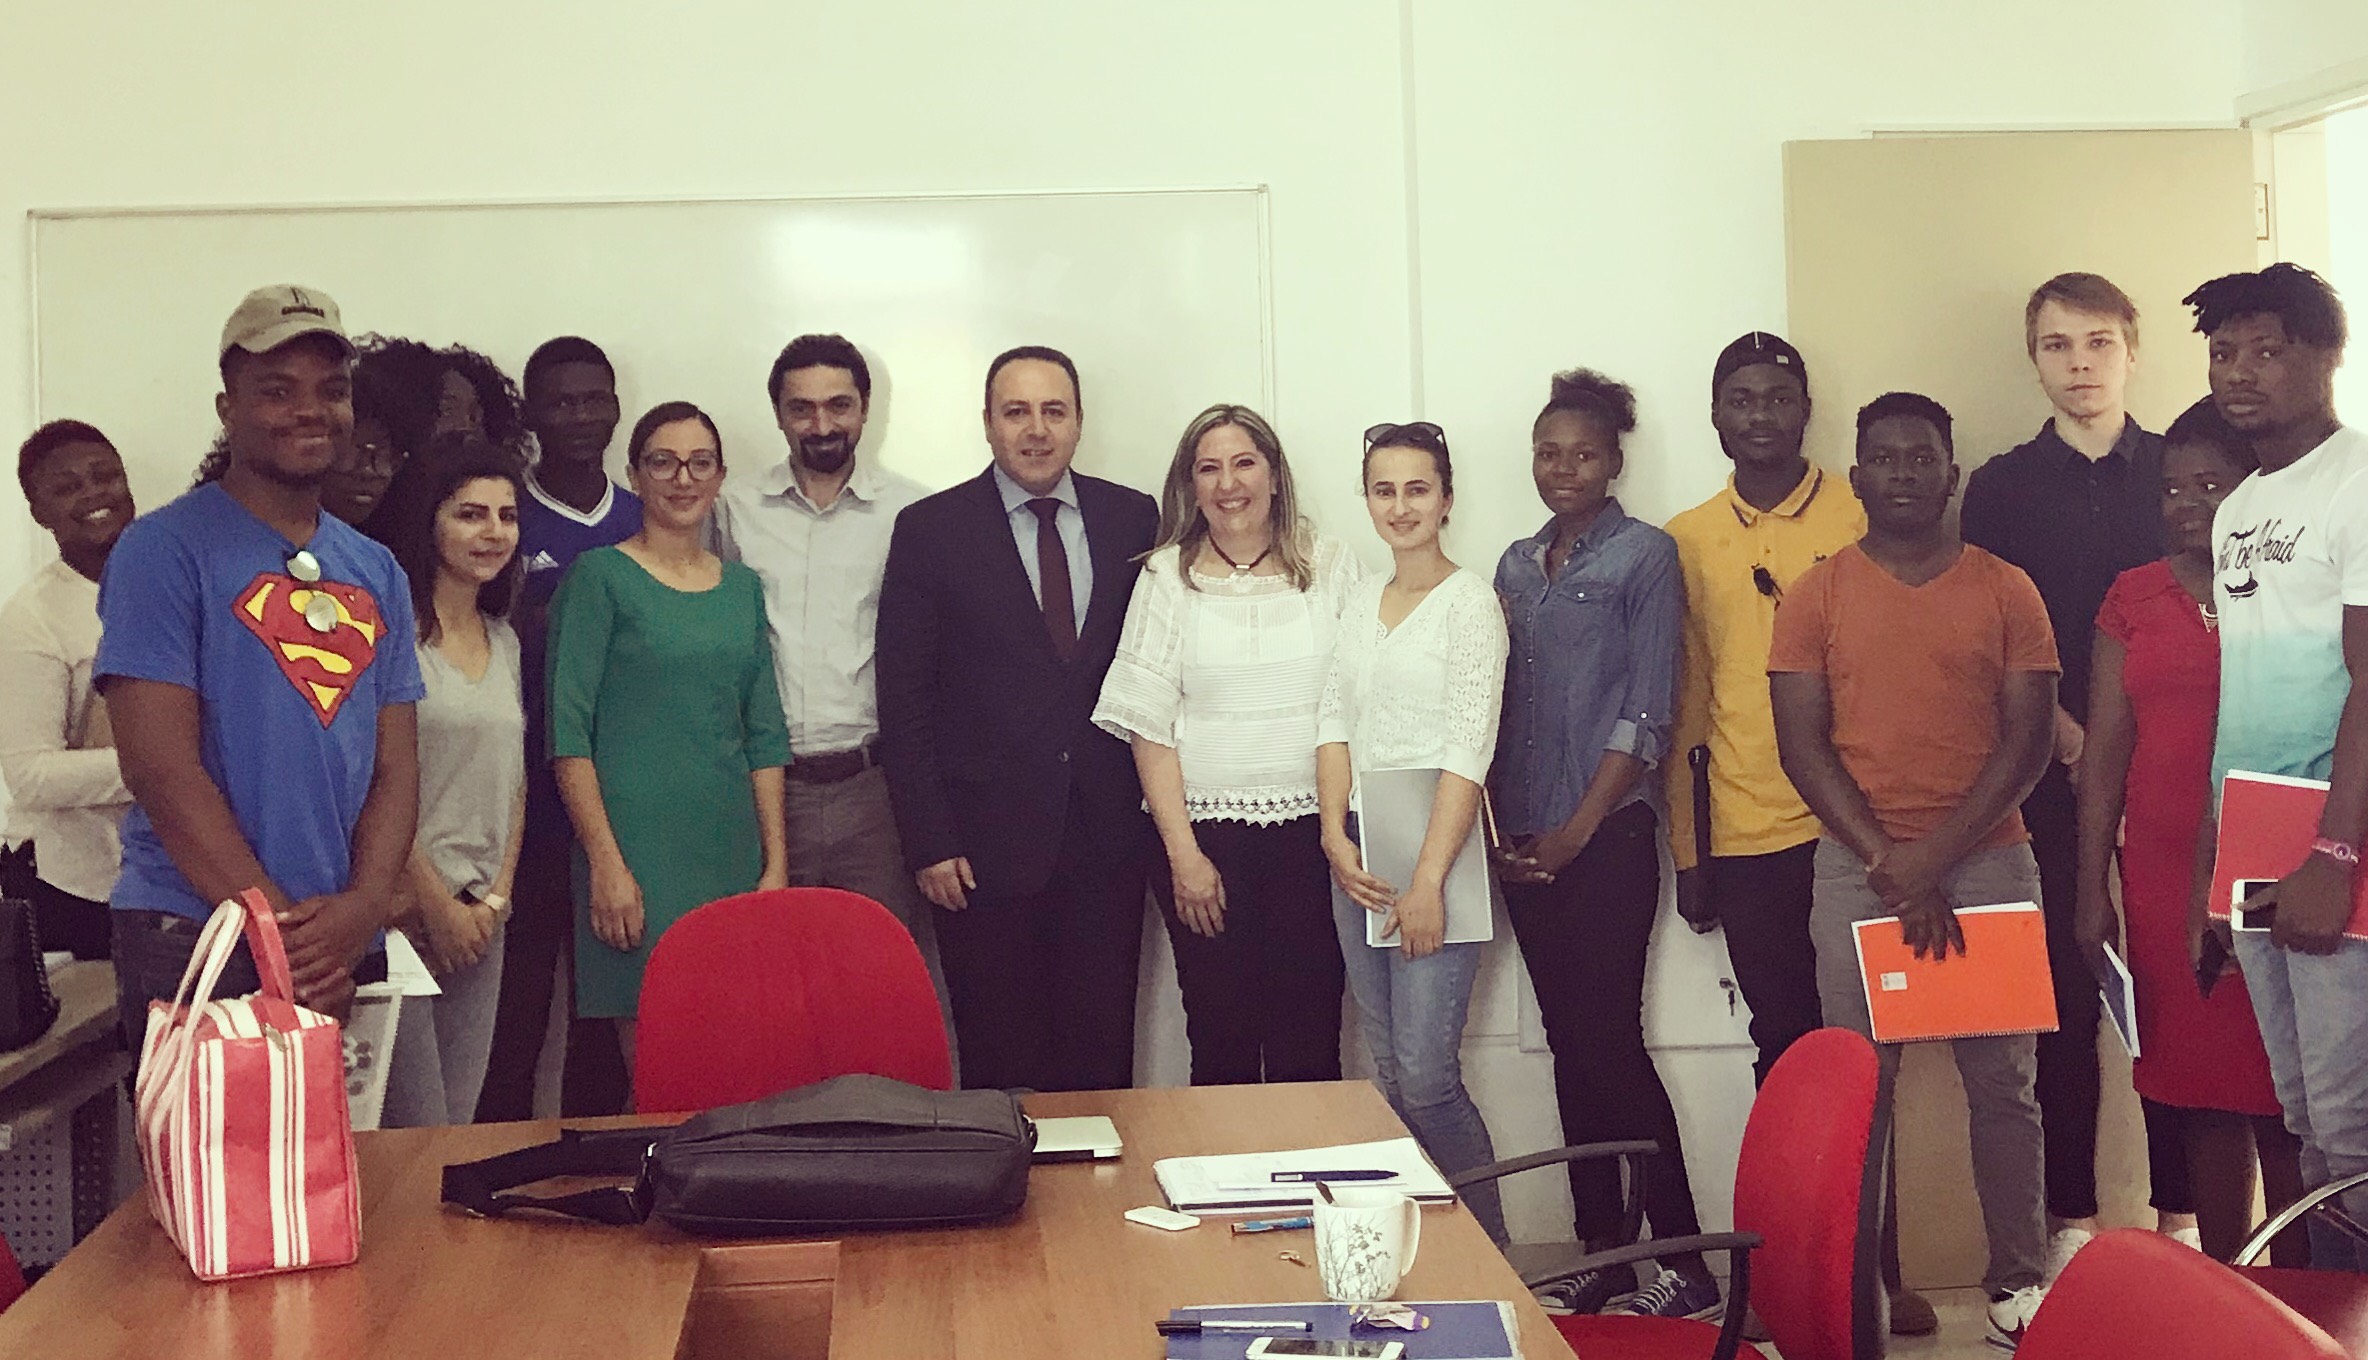 The Future of European Union and Cyprus were discussed at Near East University